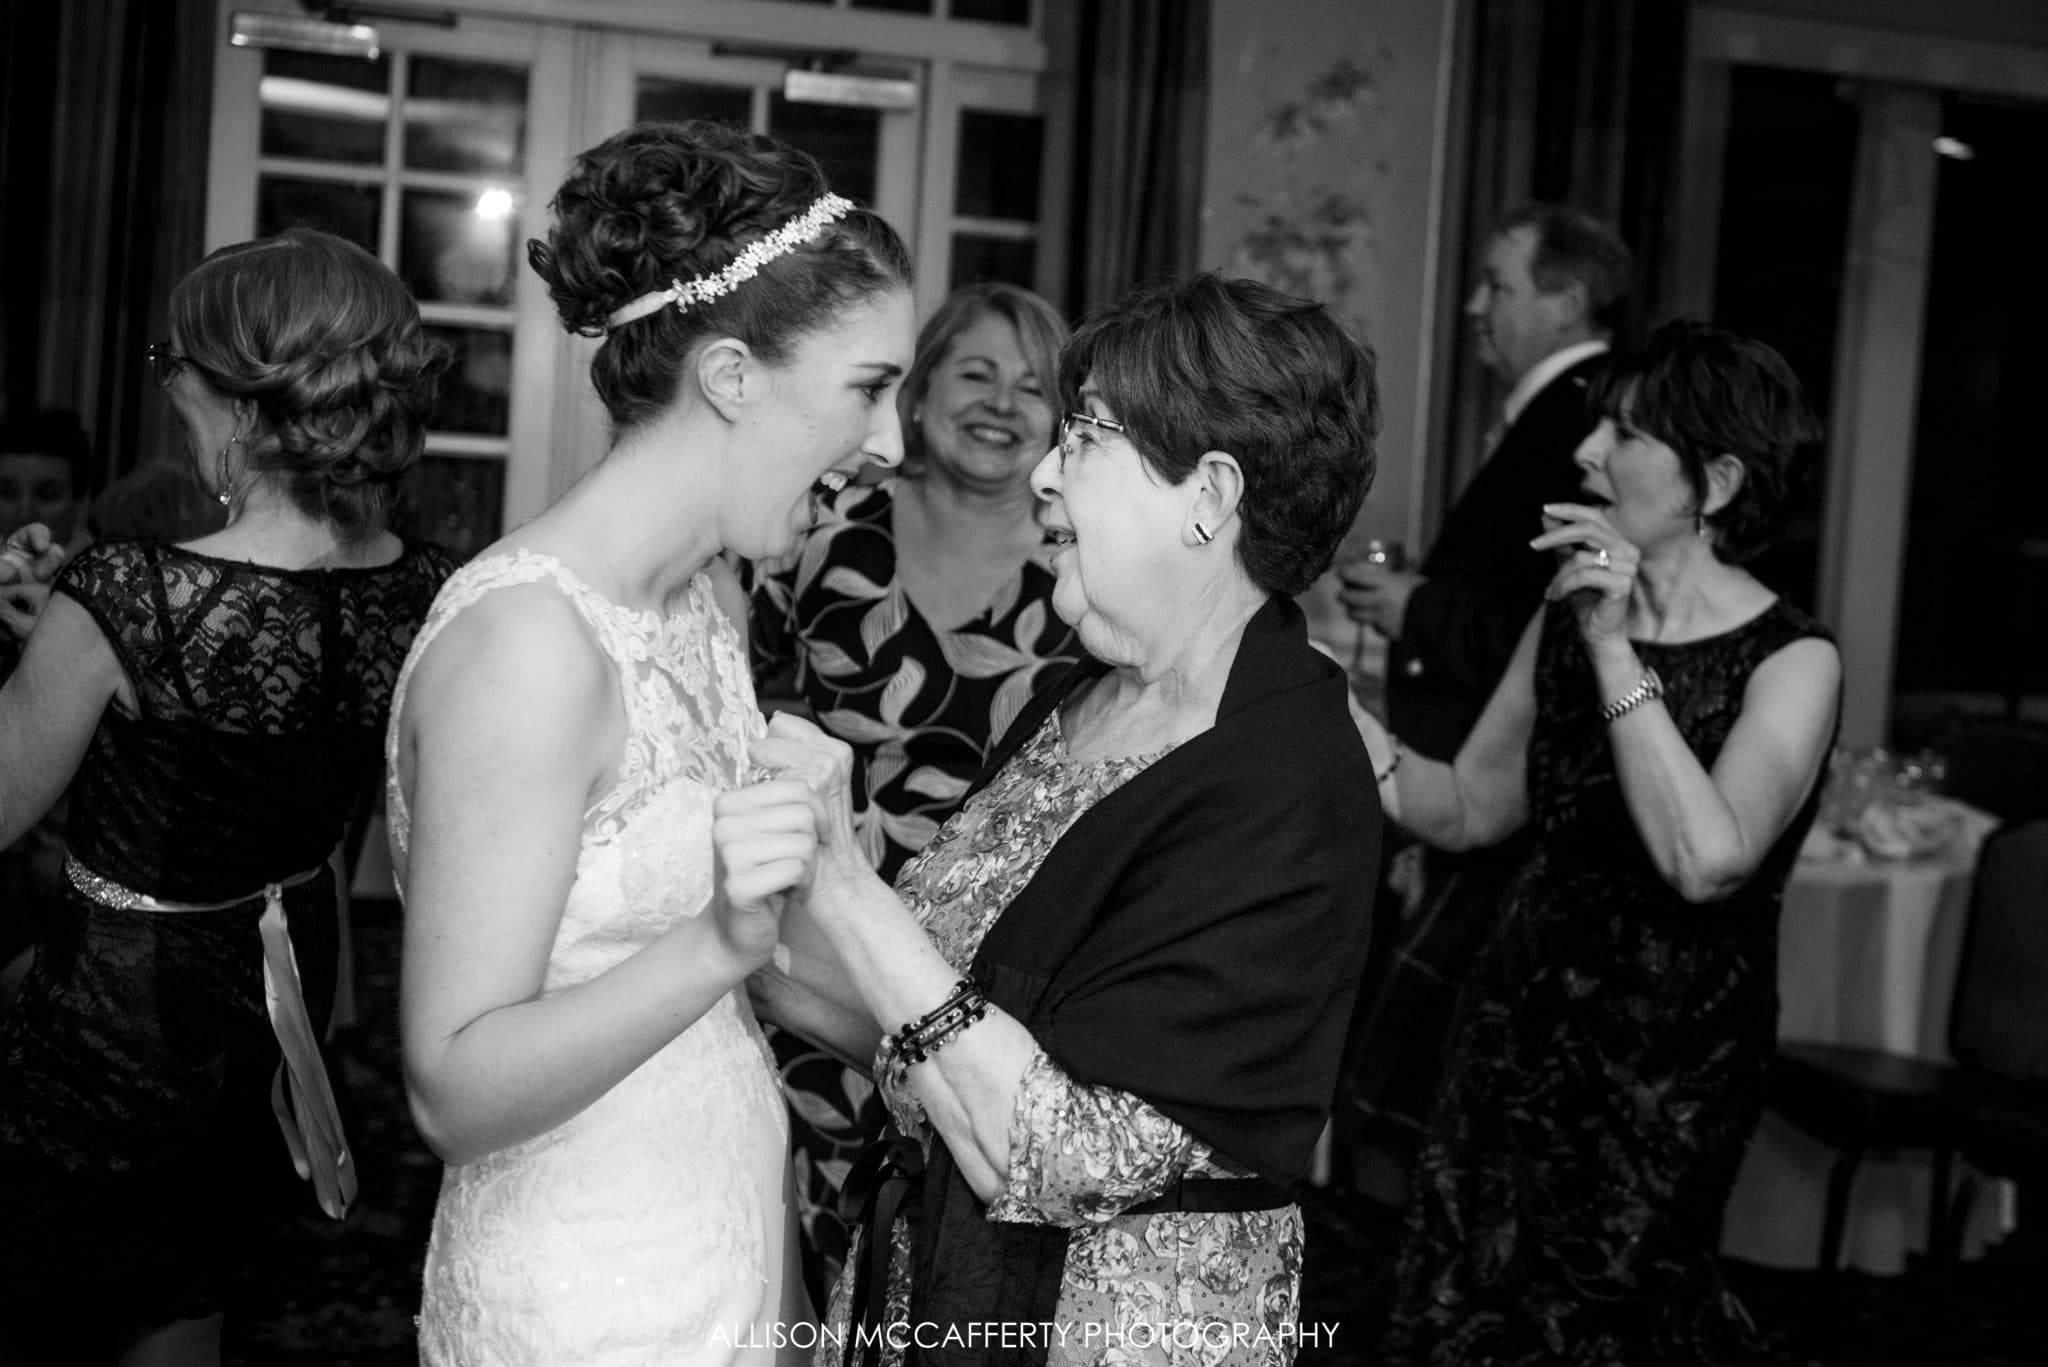 Bride and her grandmother dancing